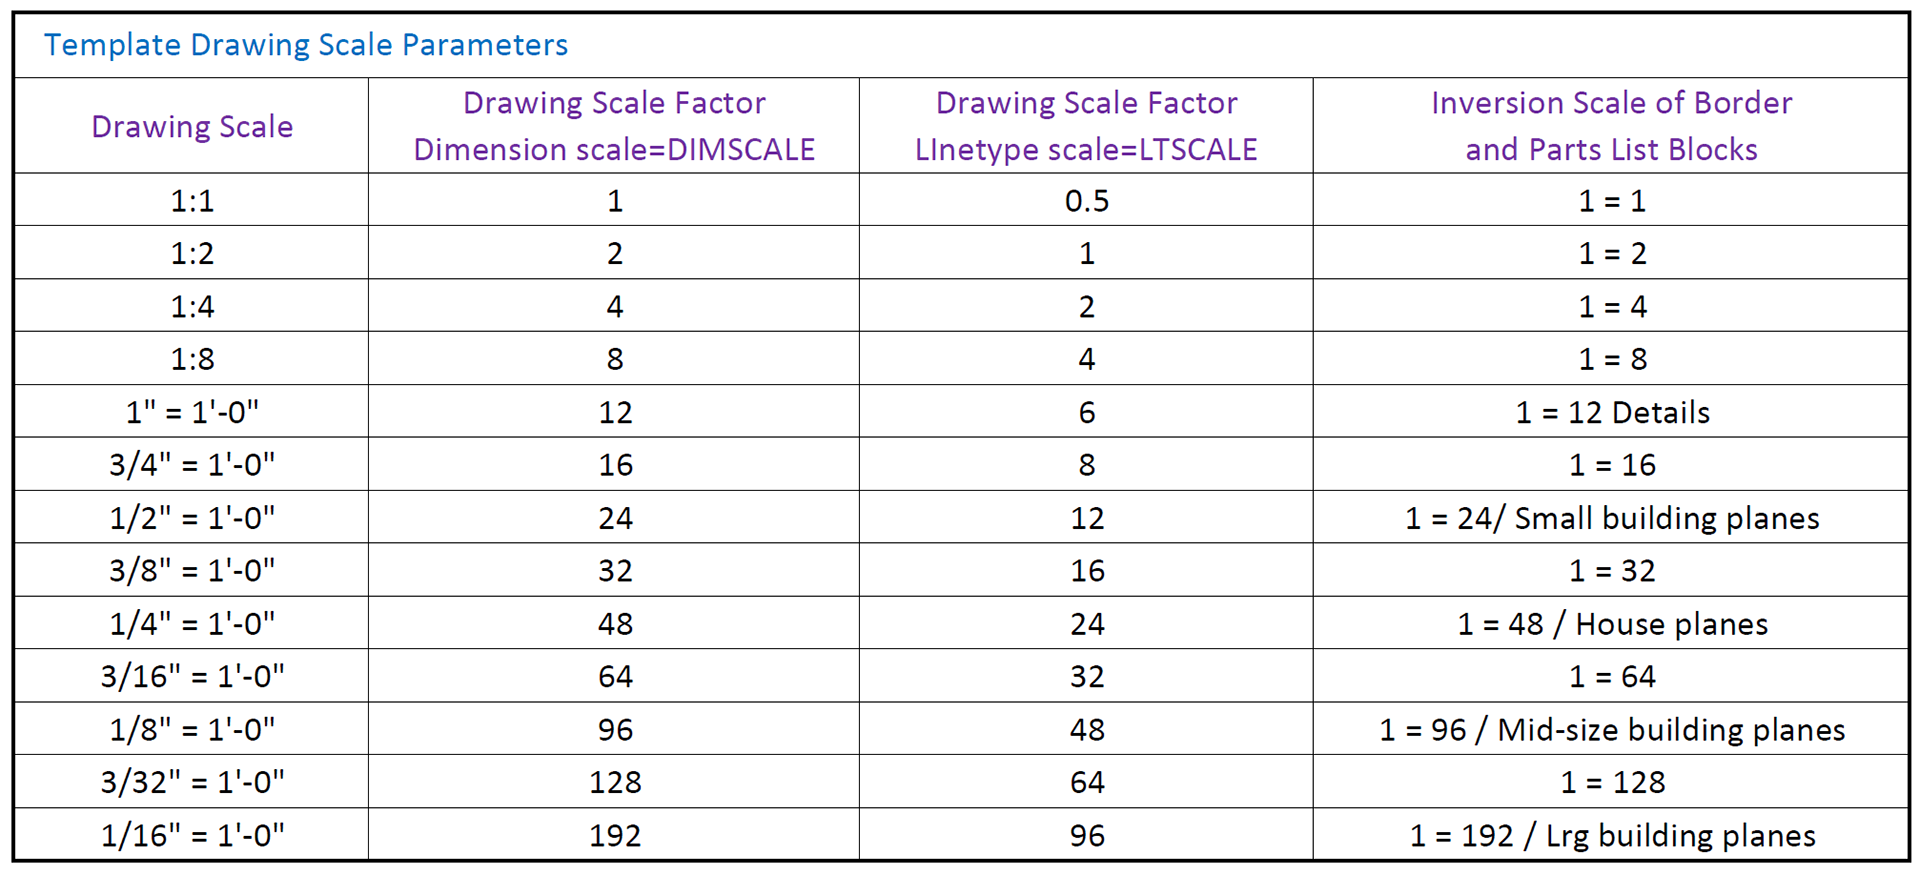 Template Drawing Scale Parameters